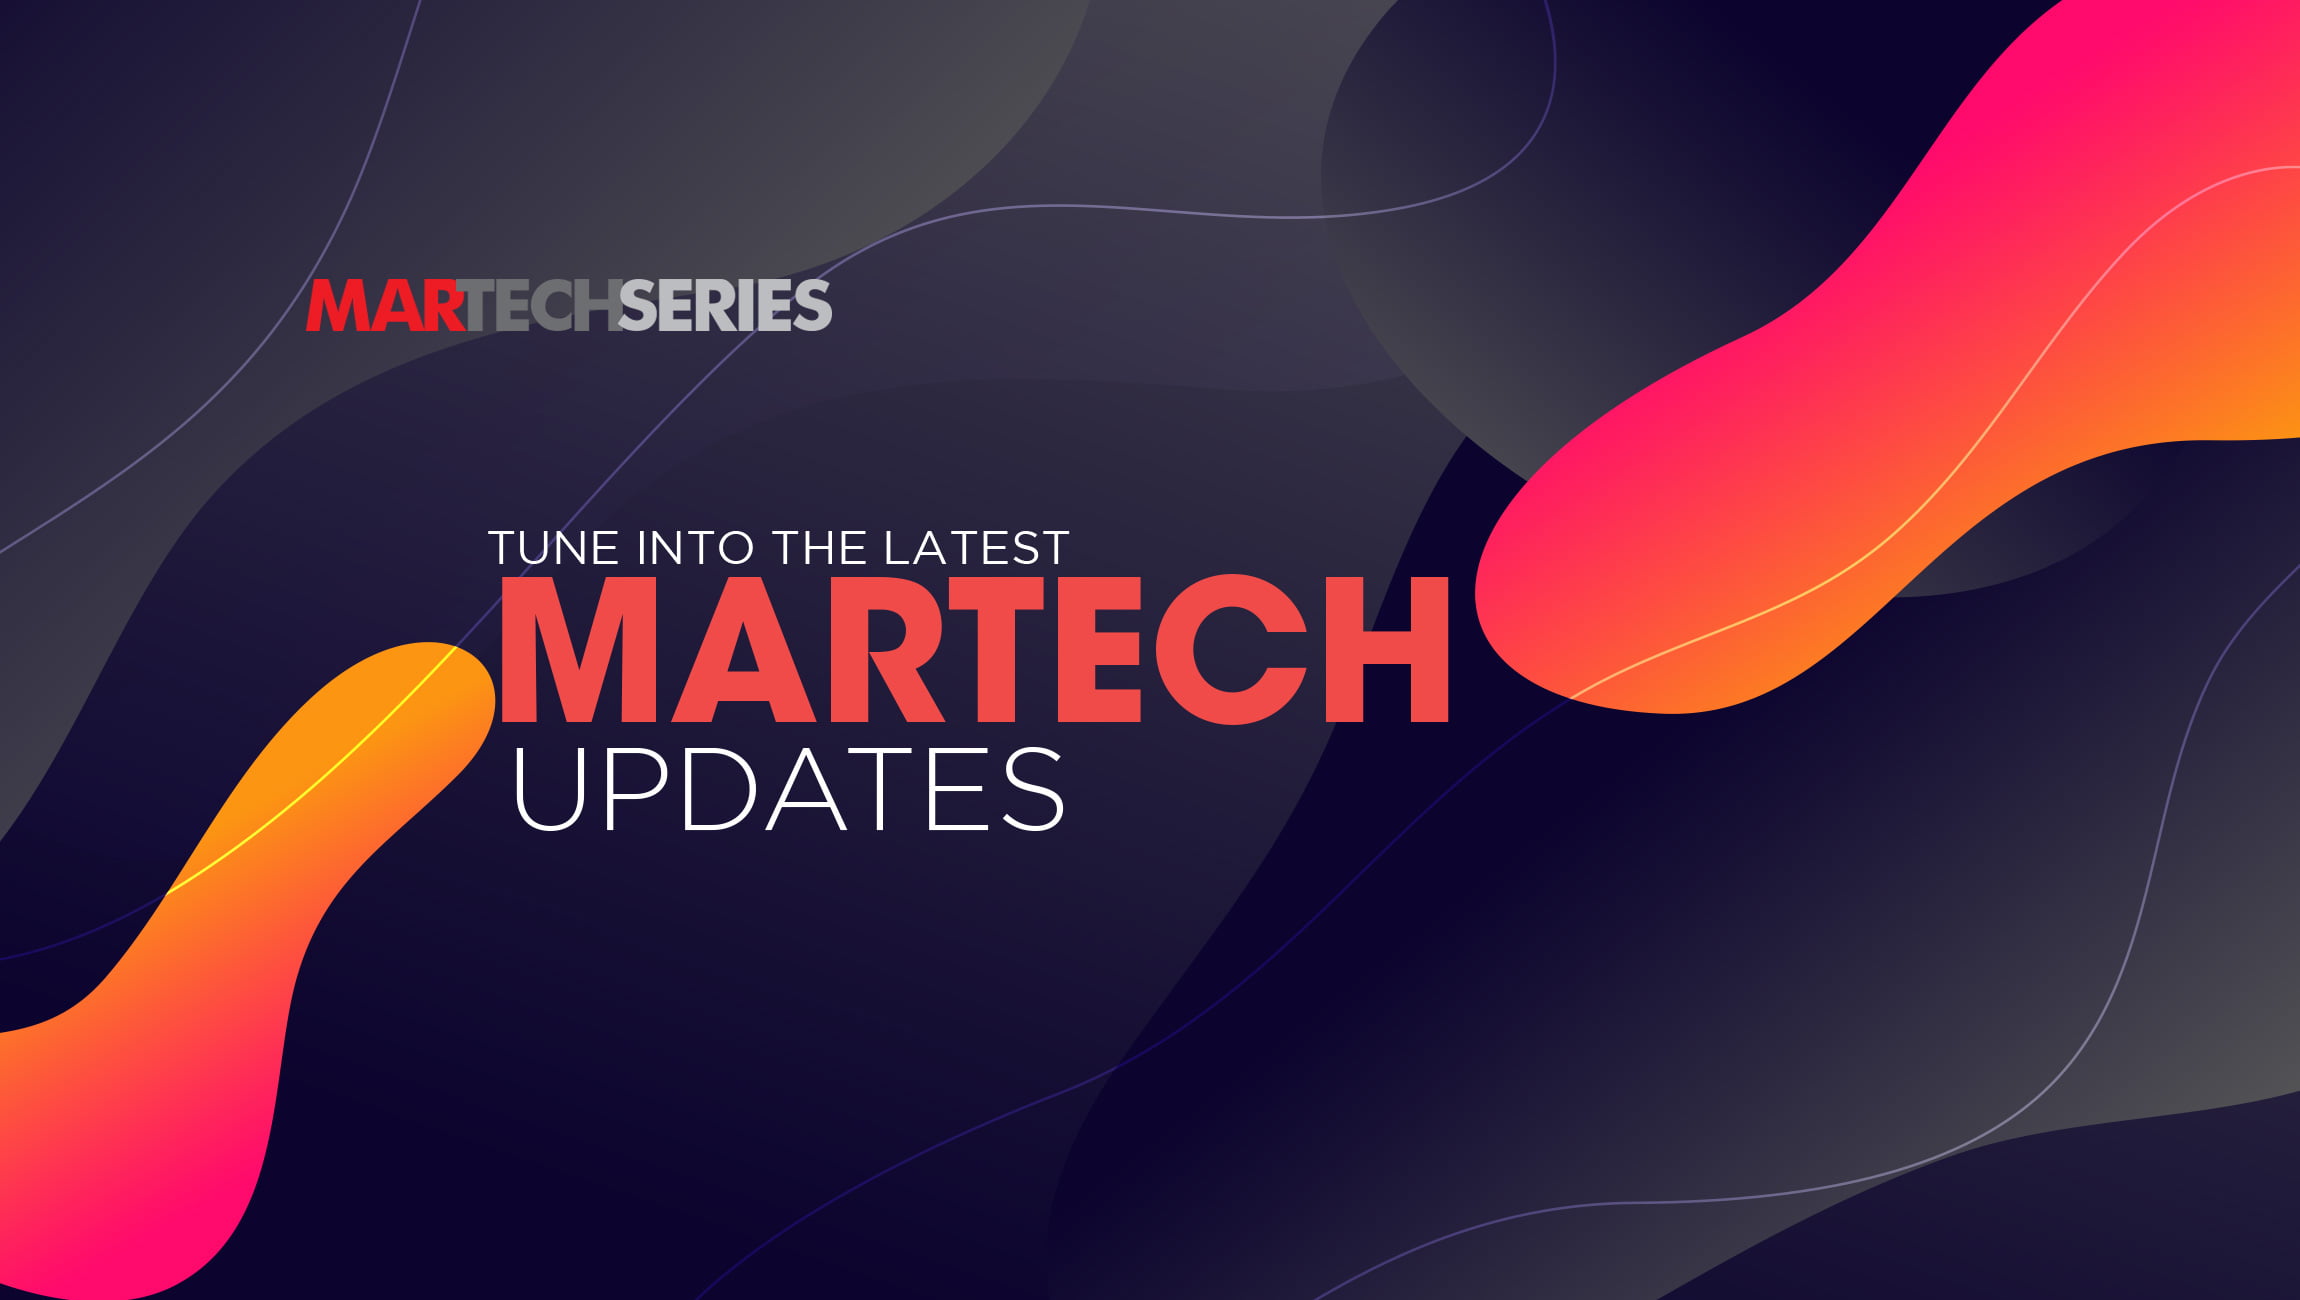 Daily MarTech Roundup: Latest News, Insights, Funding and Updates